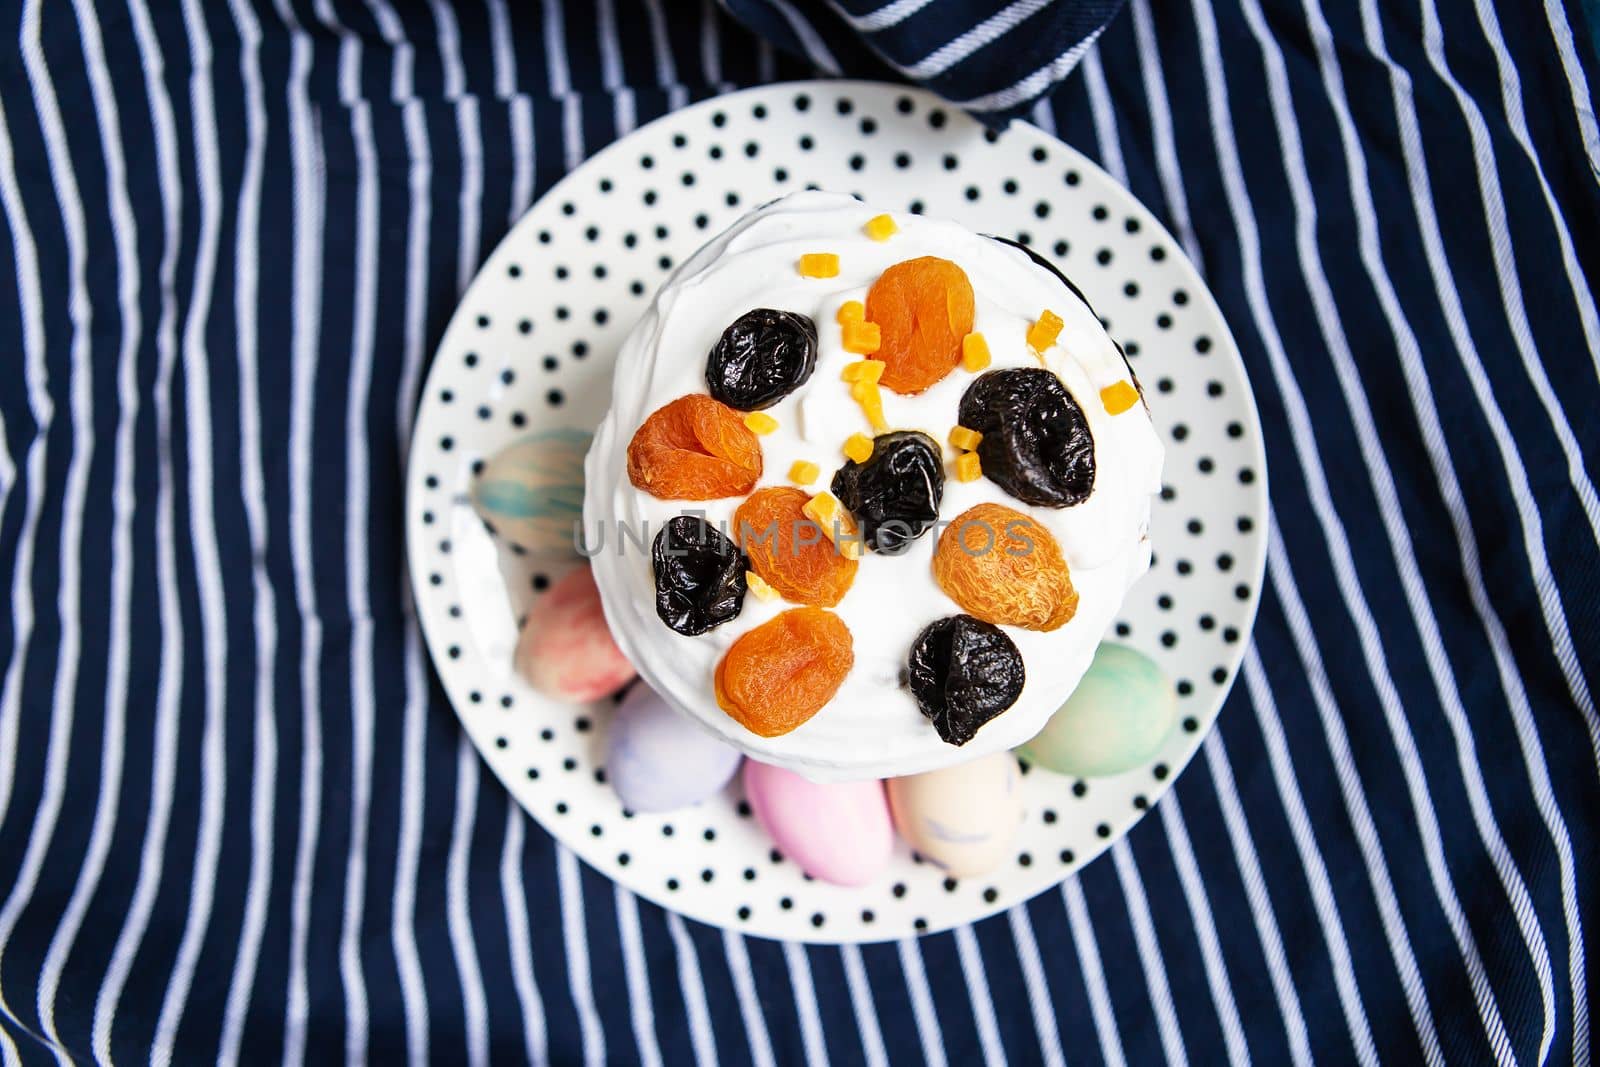 Easter eggs and Easter cake are on a plate, lying on a striped blue apron. Easter religious holiday concept